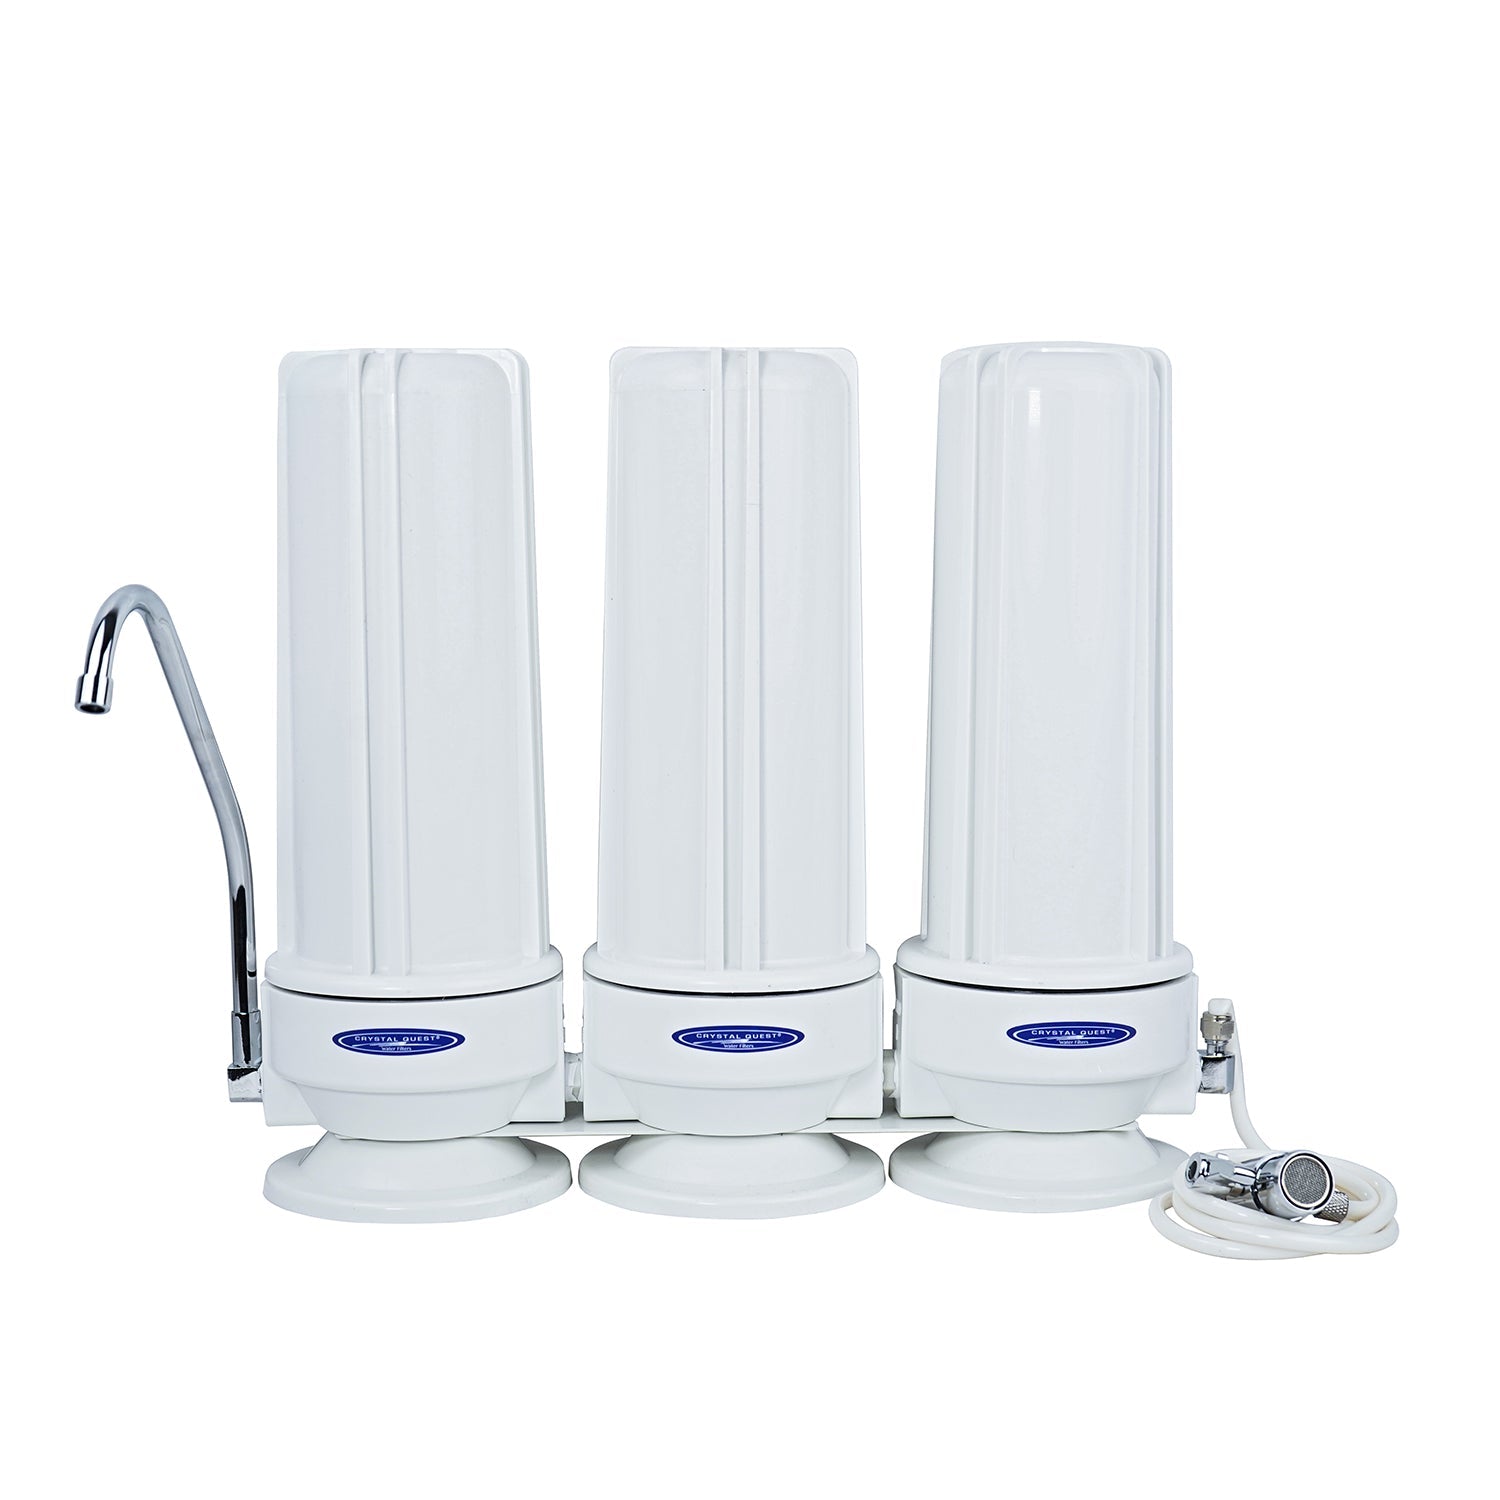 Crystal Quest Lead Countertop Water Filter System Triple Polypropylene